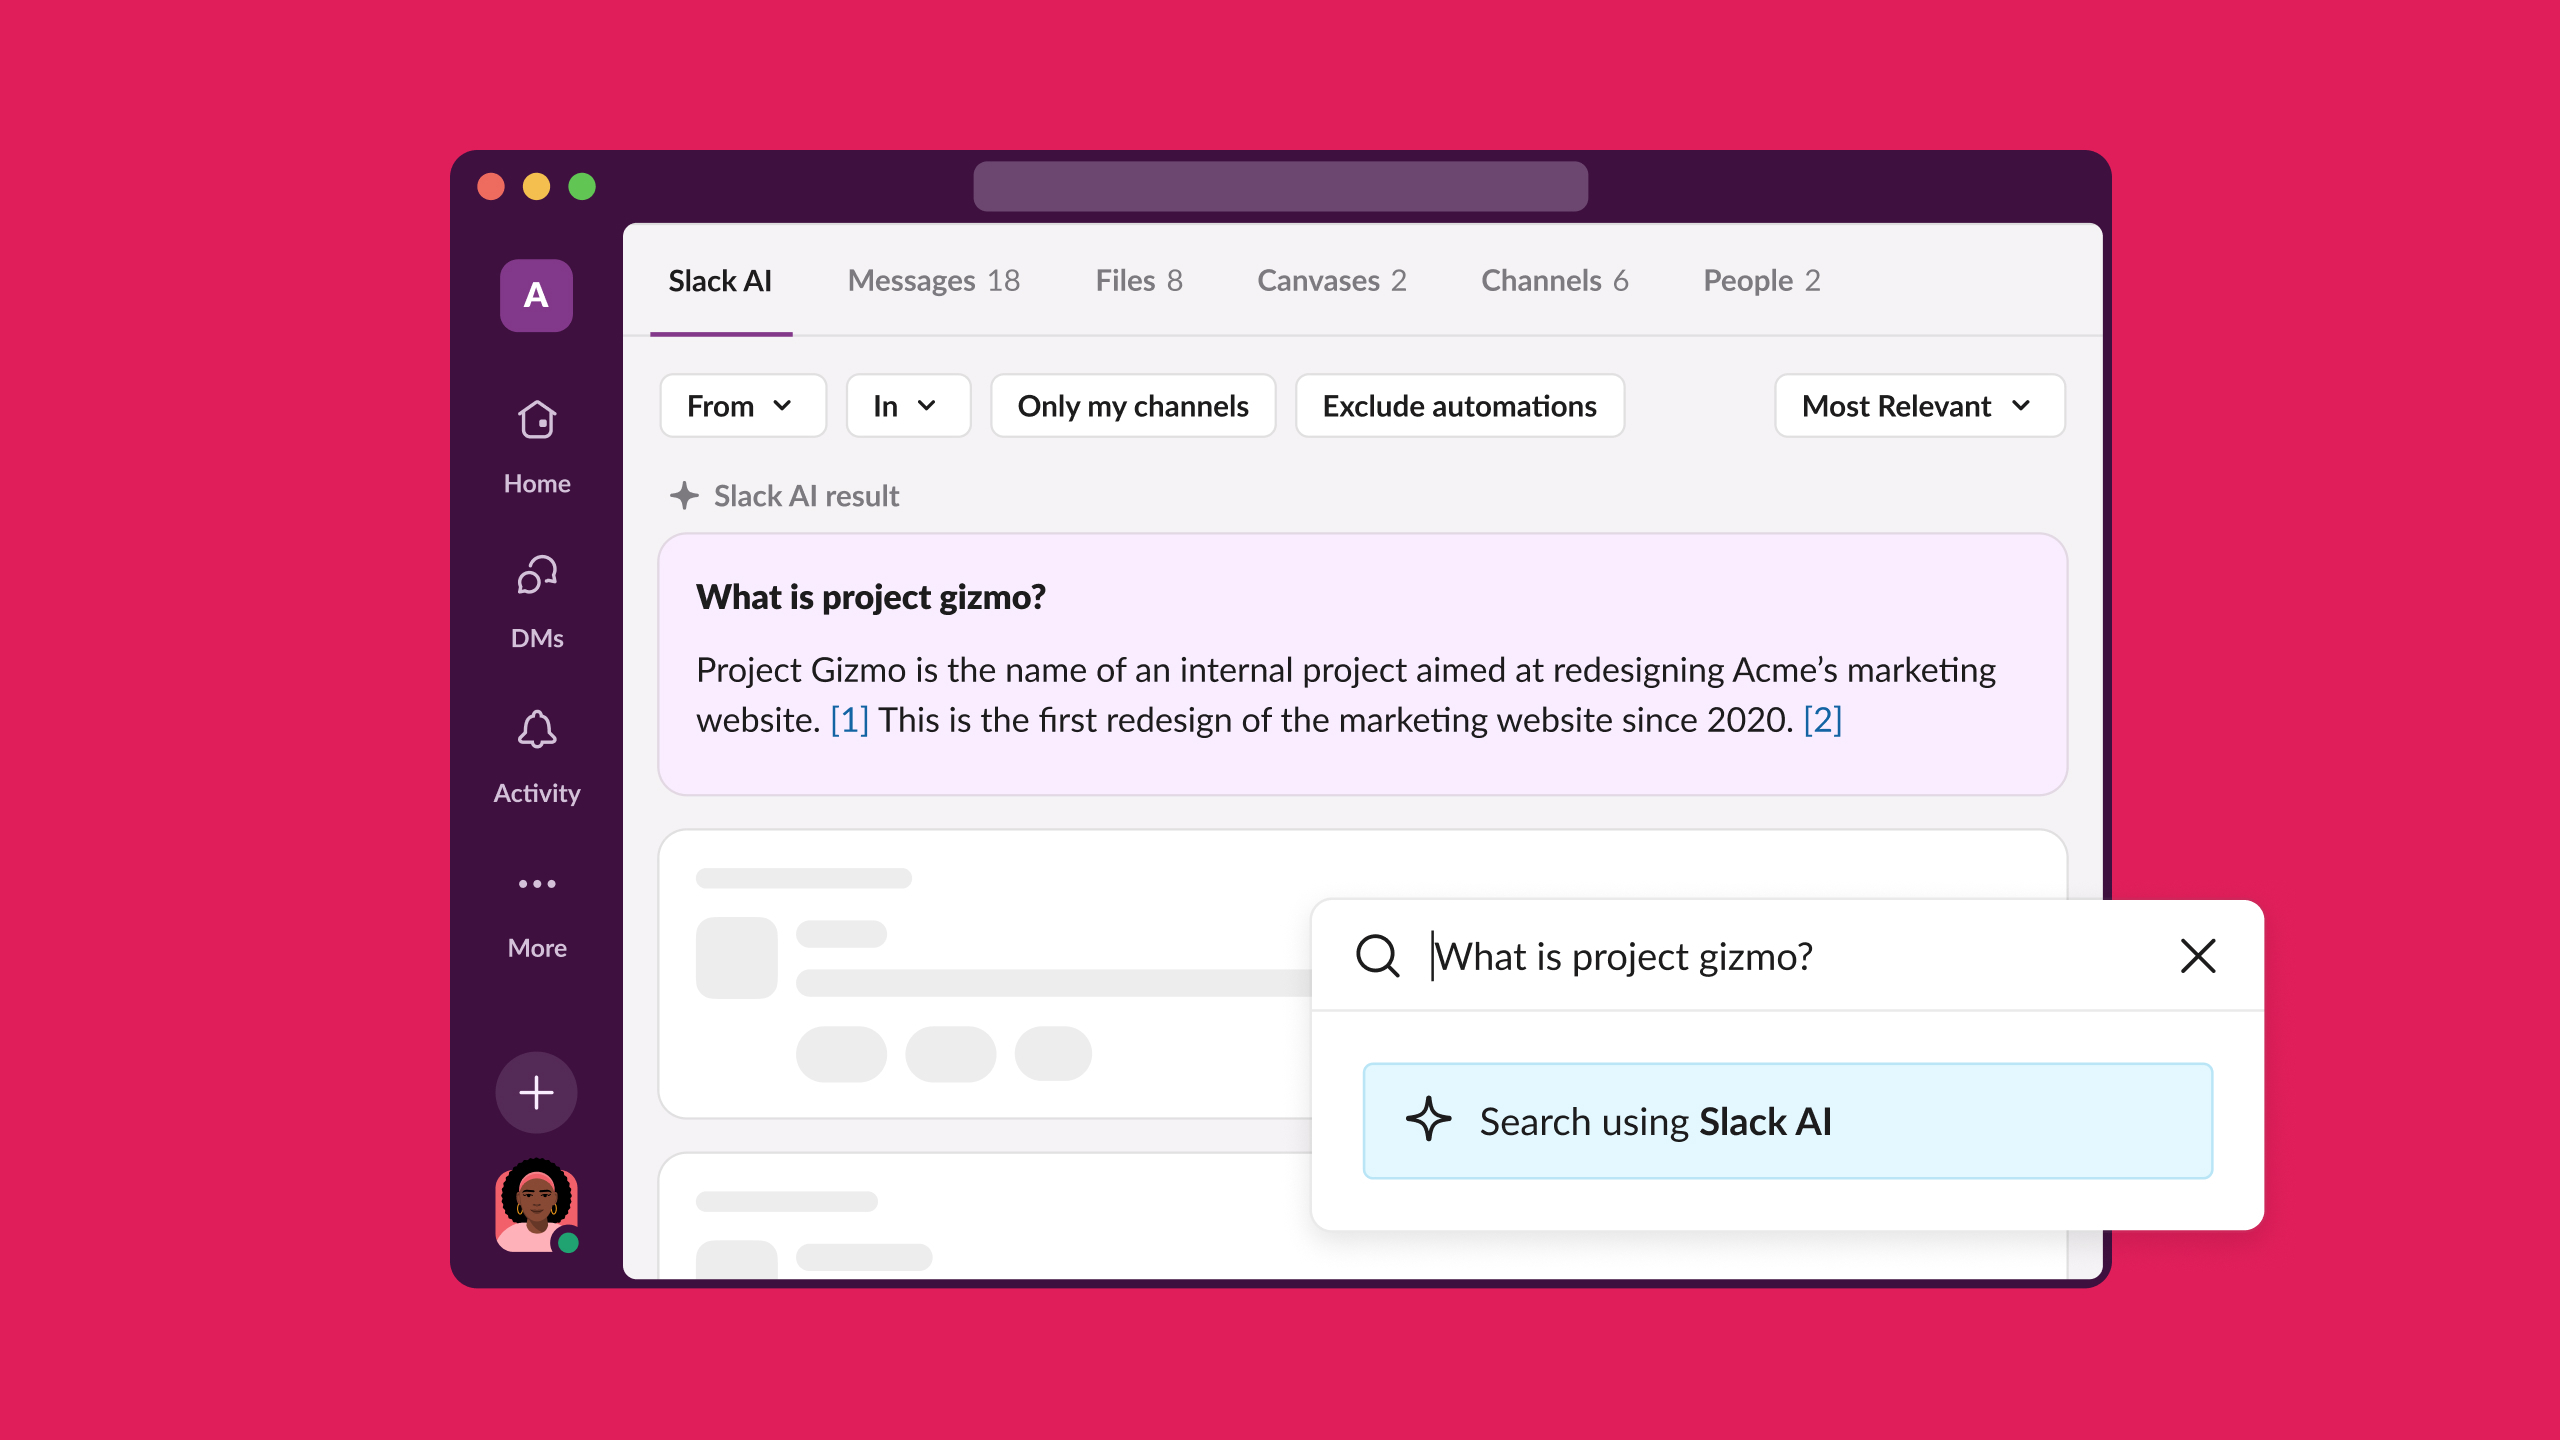 Slack AI search asking what is project gizmo and giving an answer derived from the Slack answer archive.